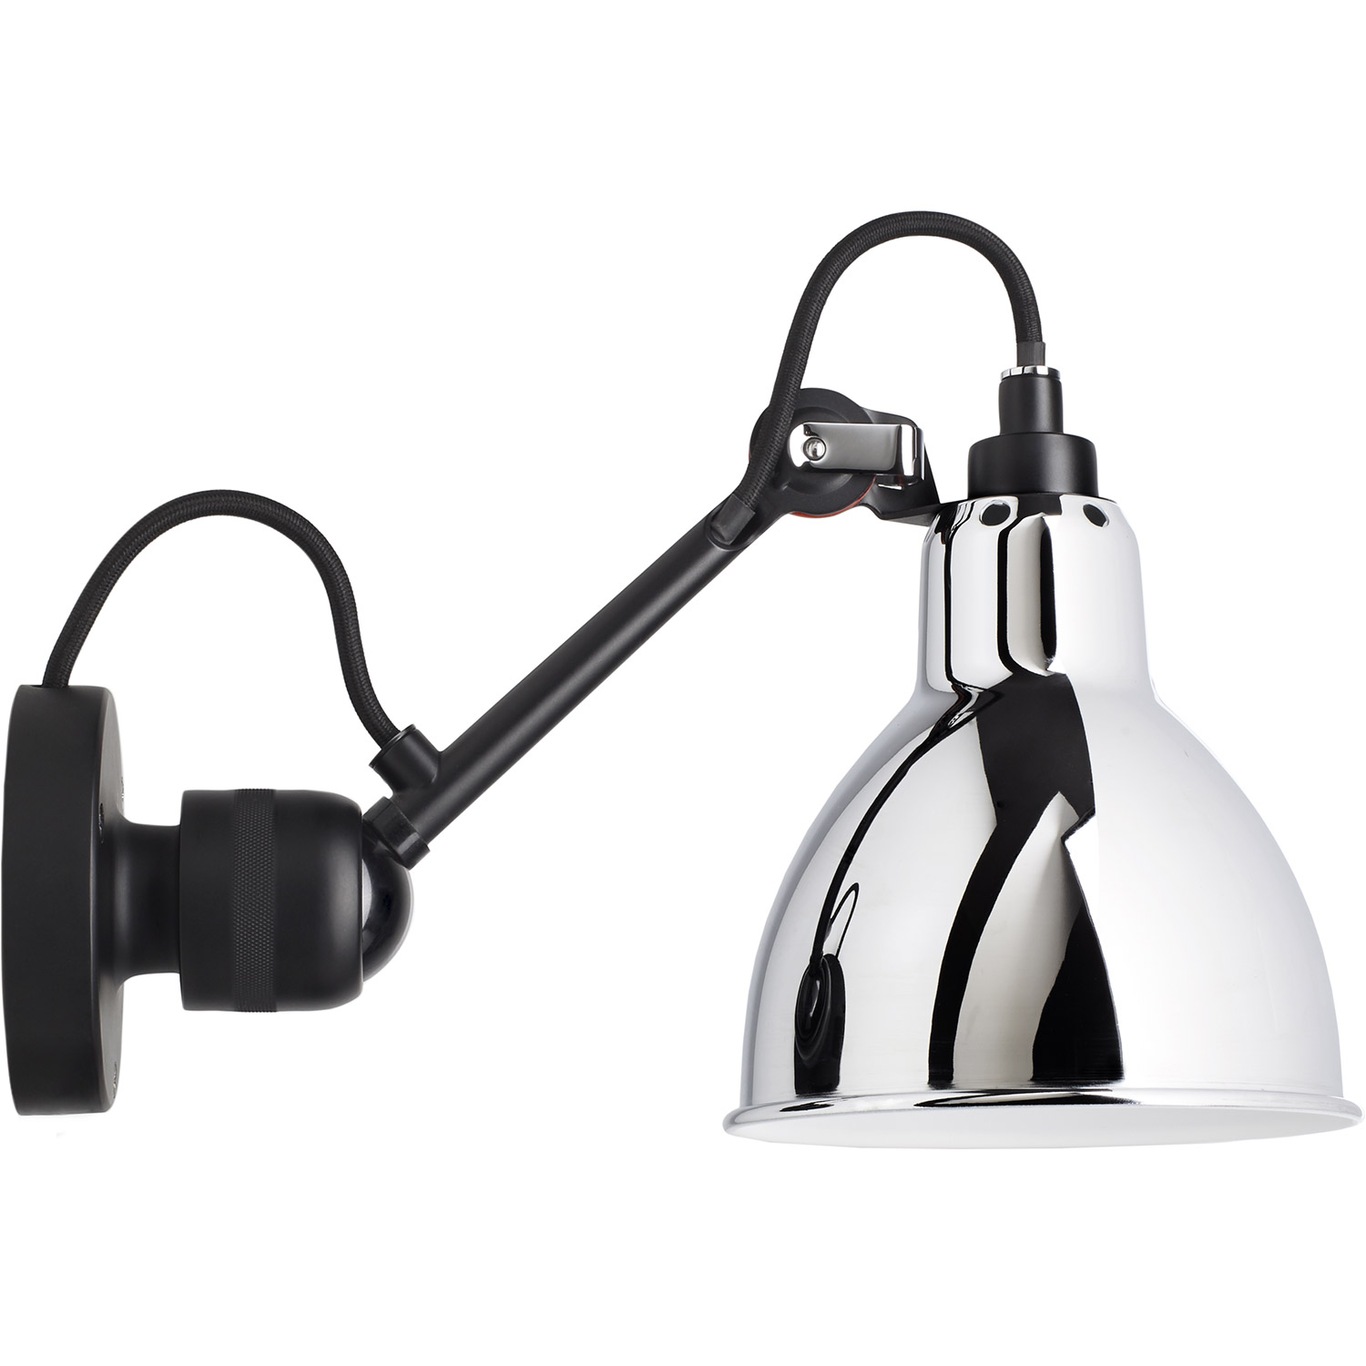 La Lampe Gras N°304 Wall Lamp With Switch, Black / Chrome